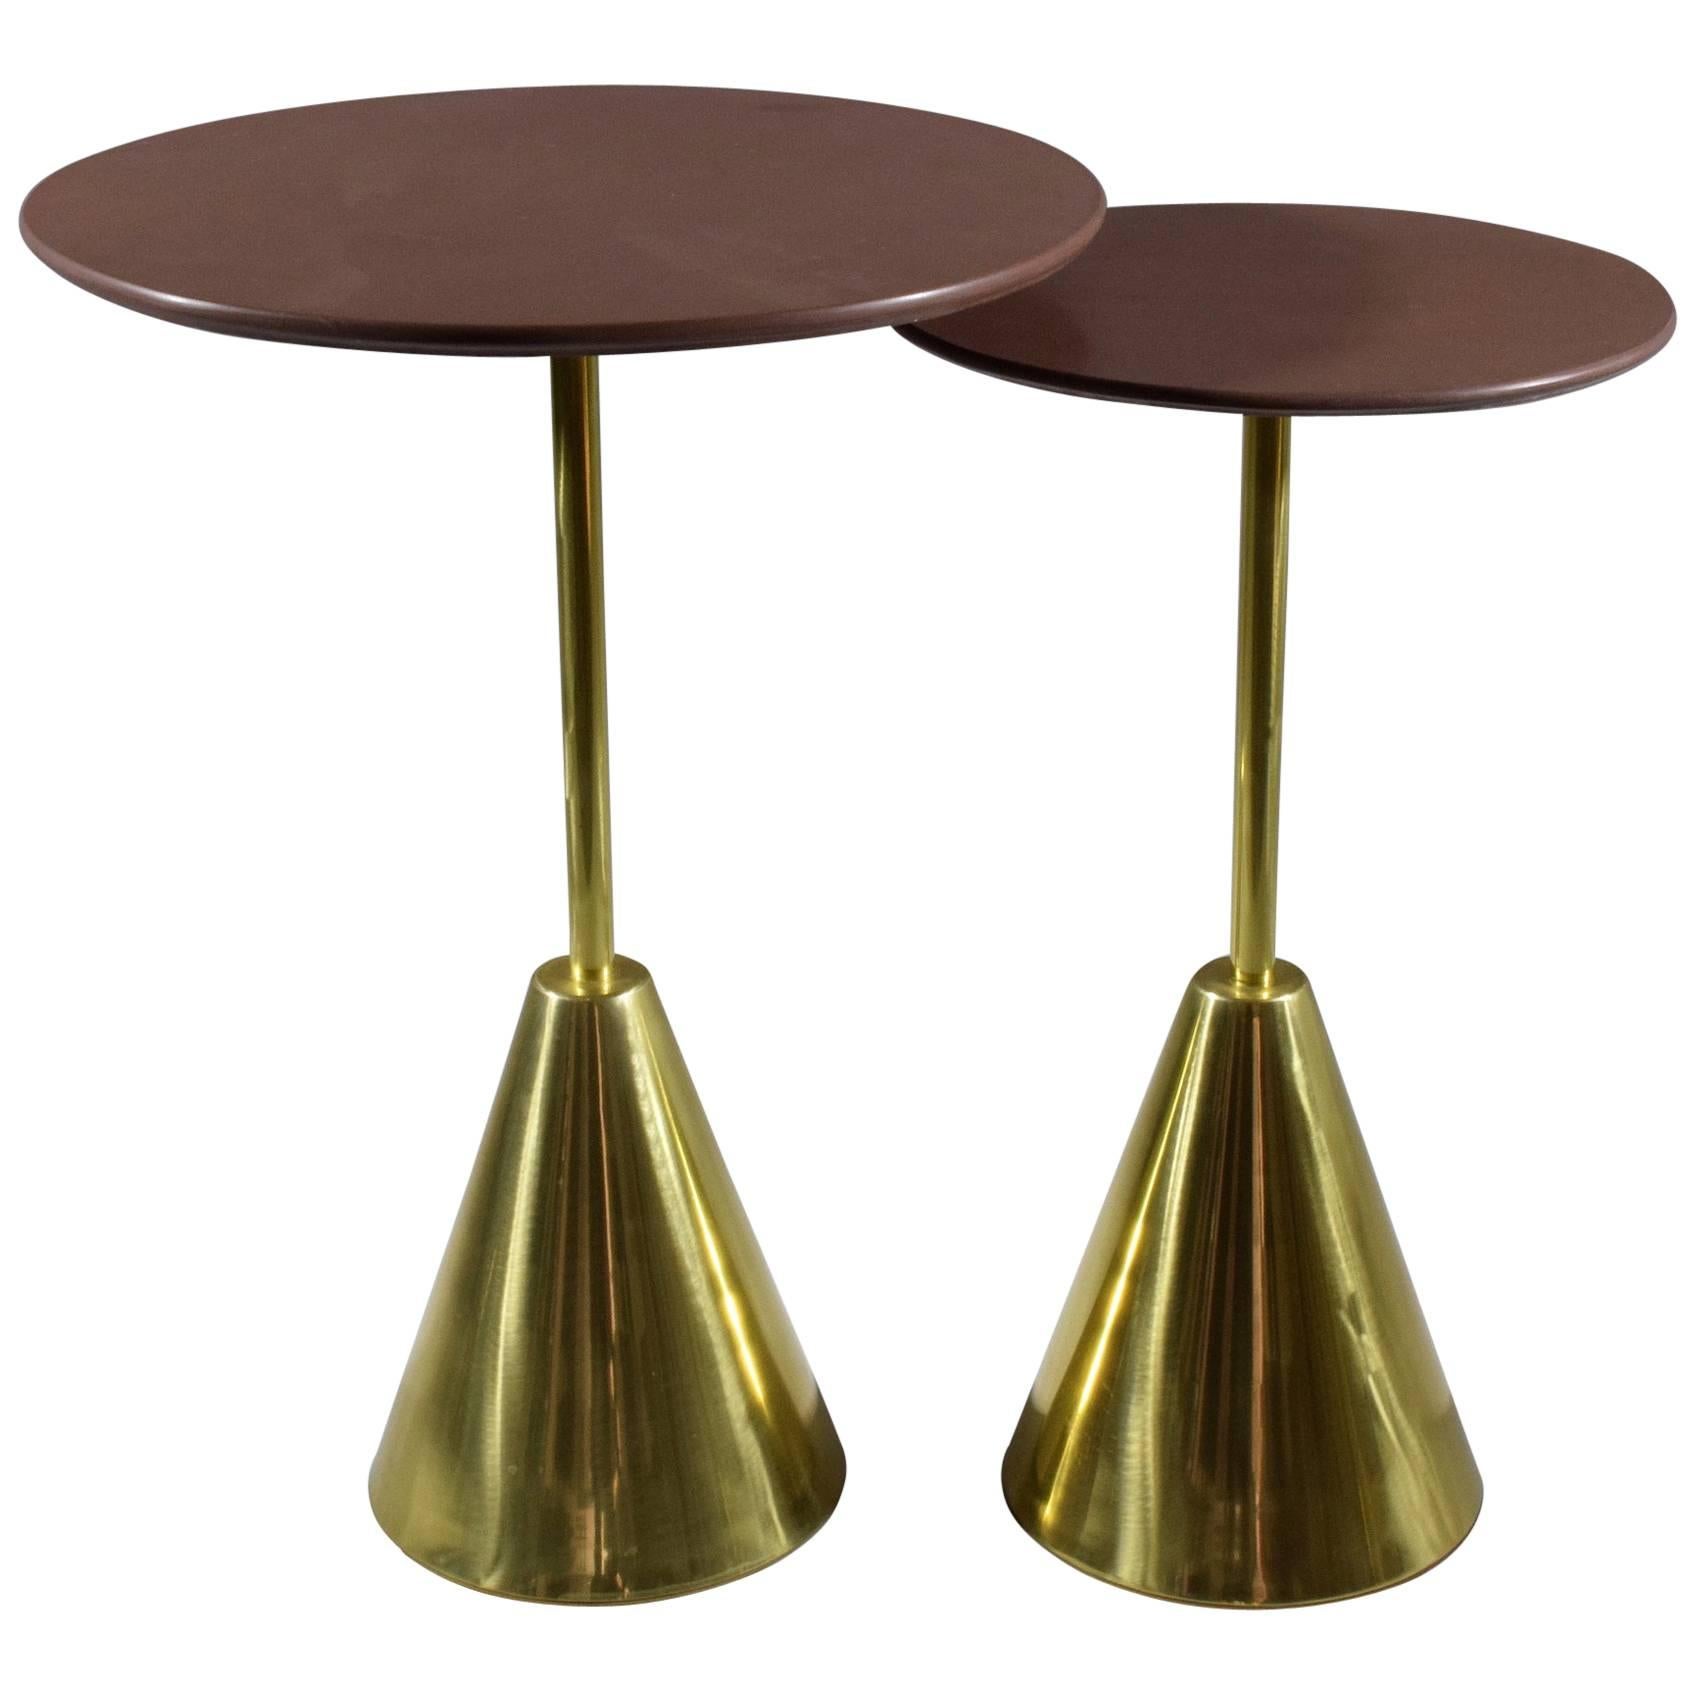 Stone-R Contemporary Handcrafted Brass Side Table, Flow Collection 11